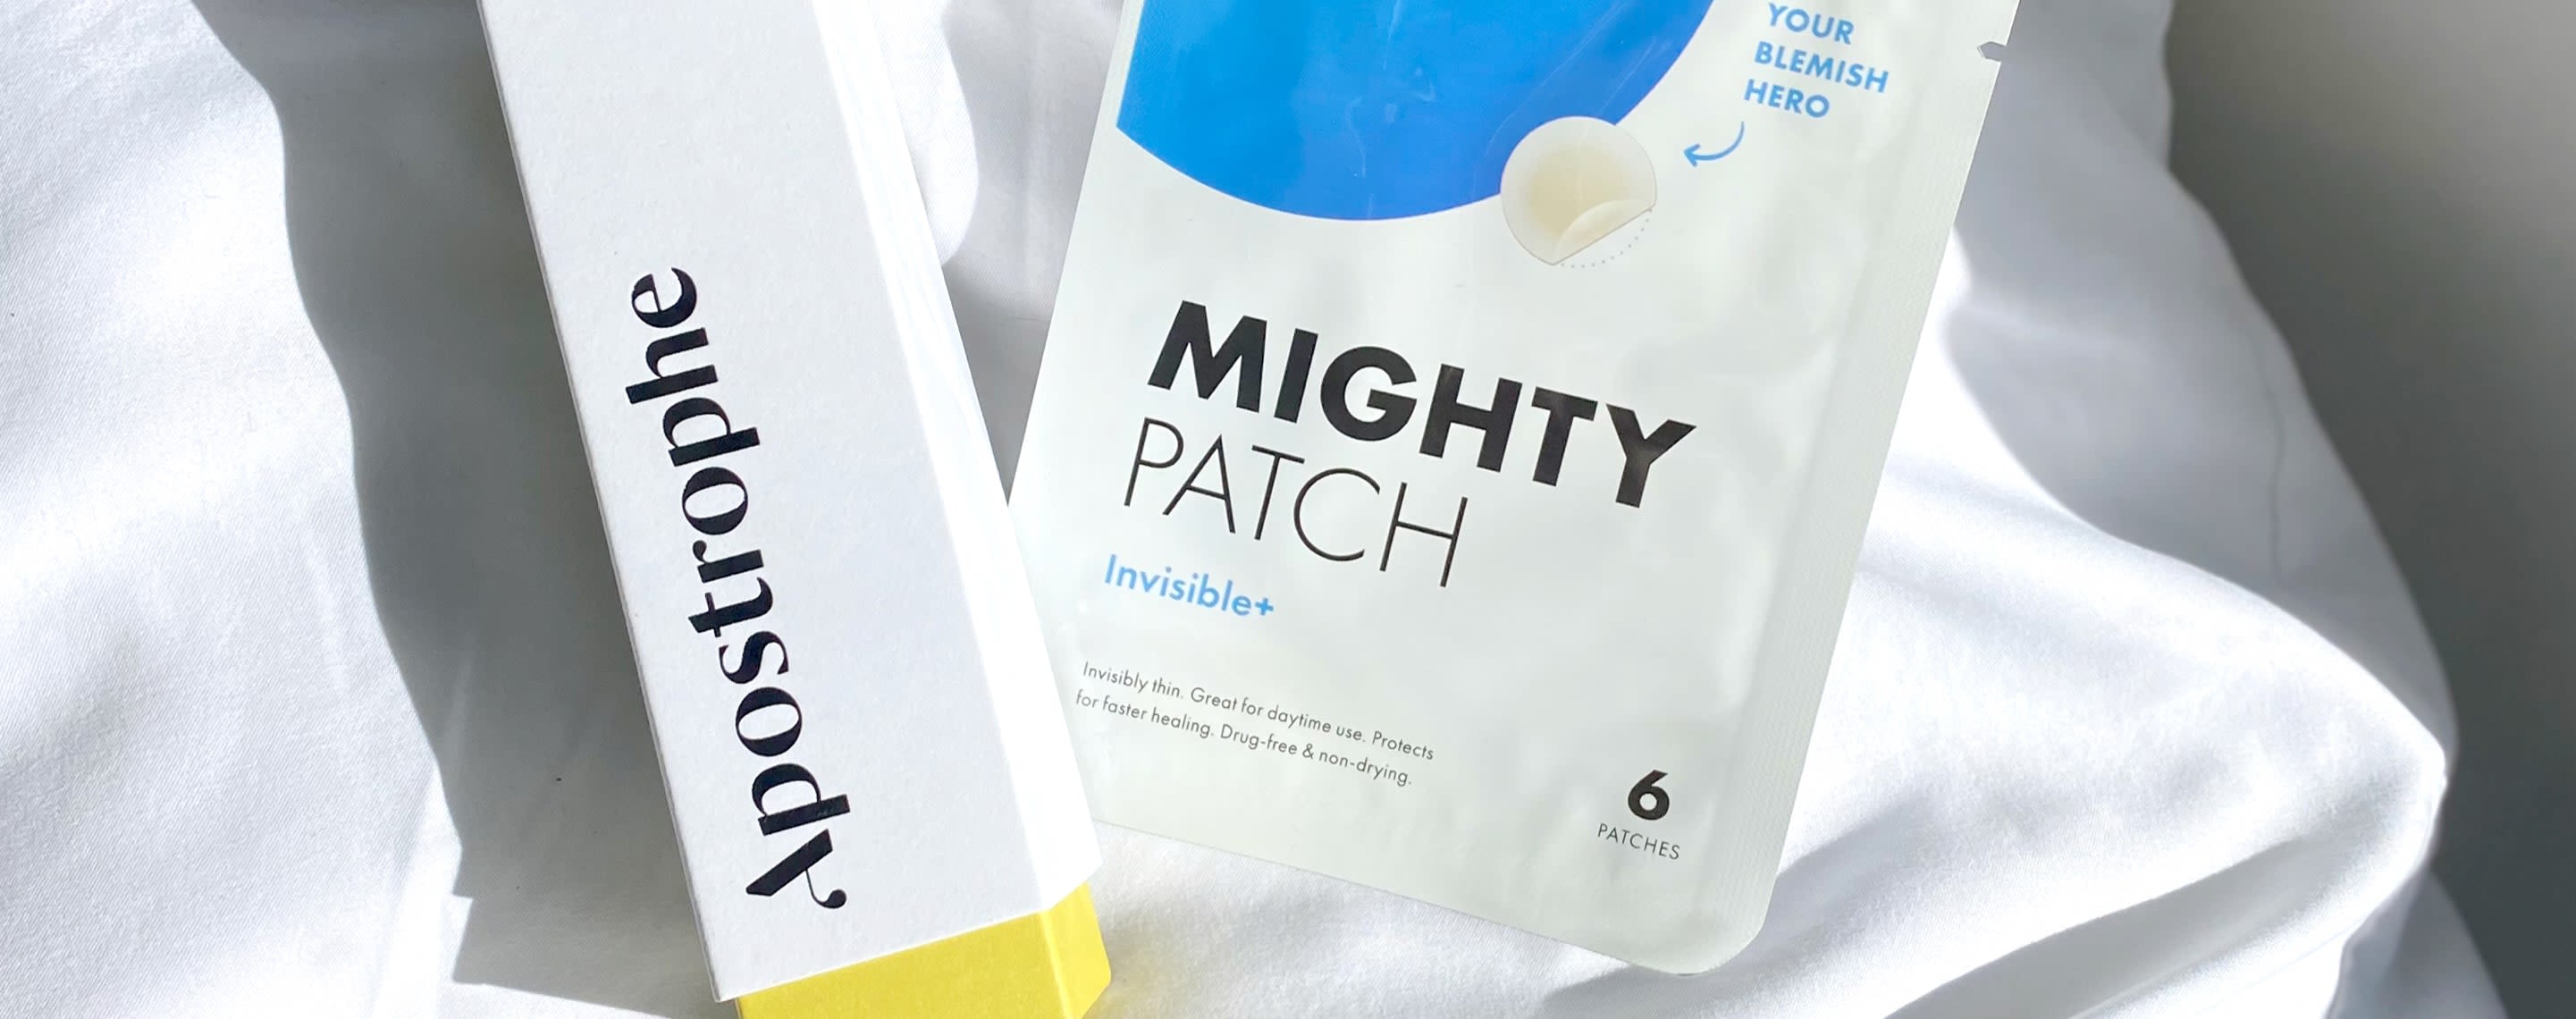 Hero Cosmetics - Mighty Patch Invisible